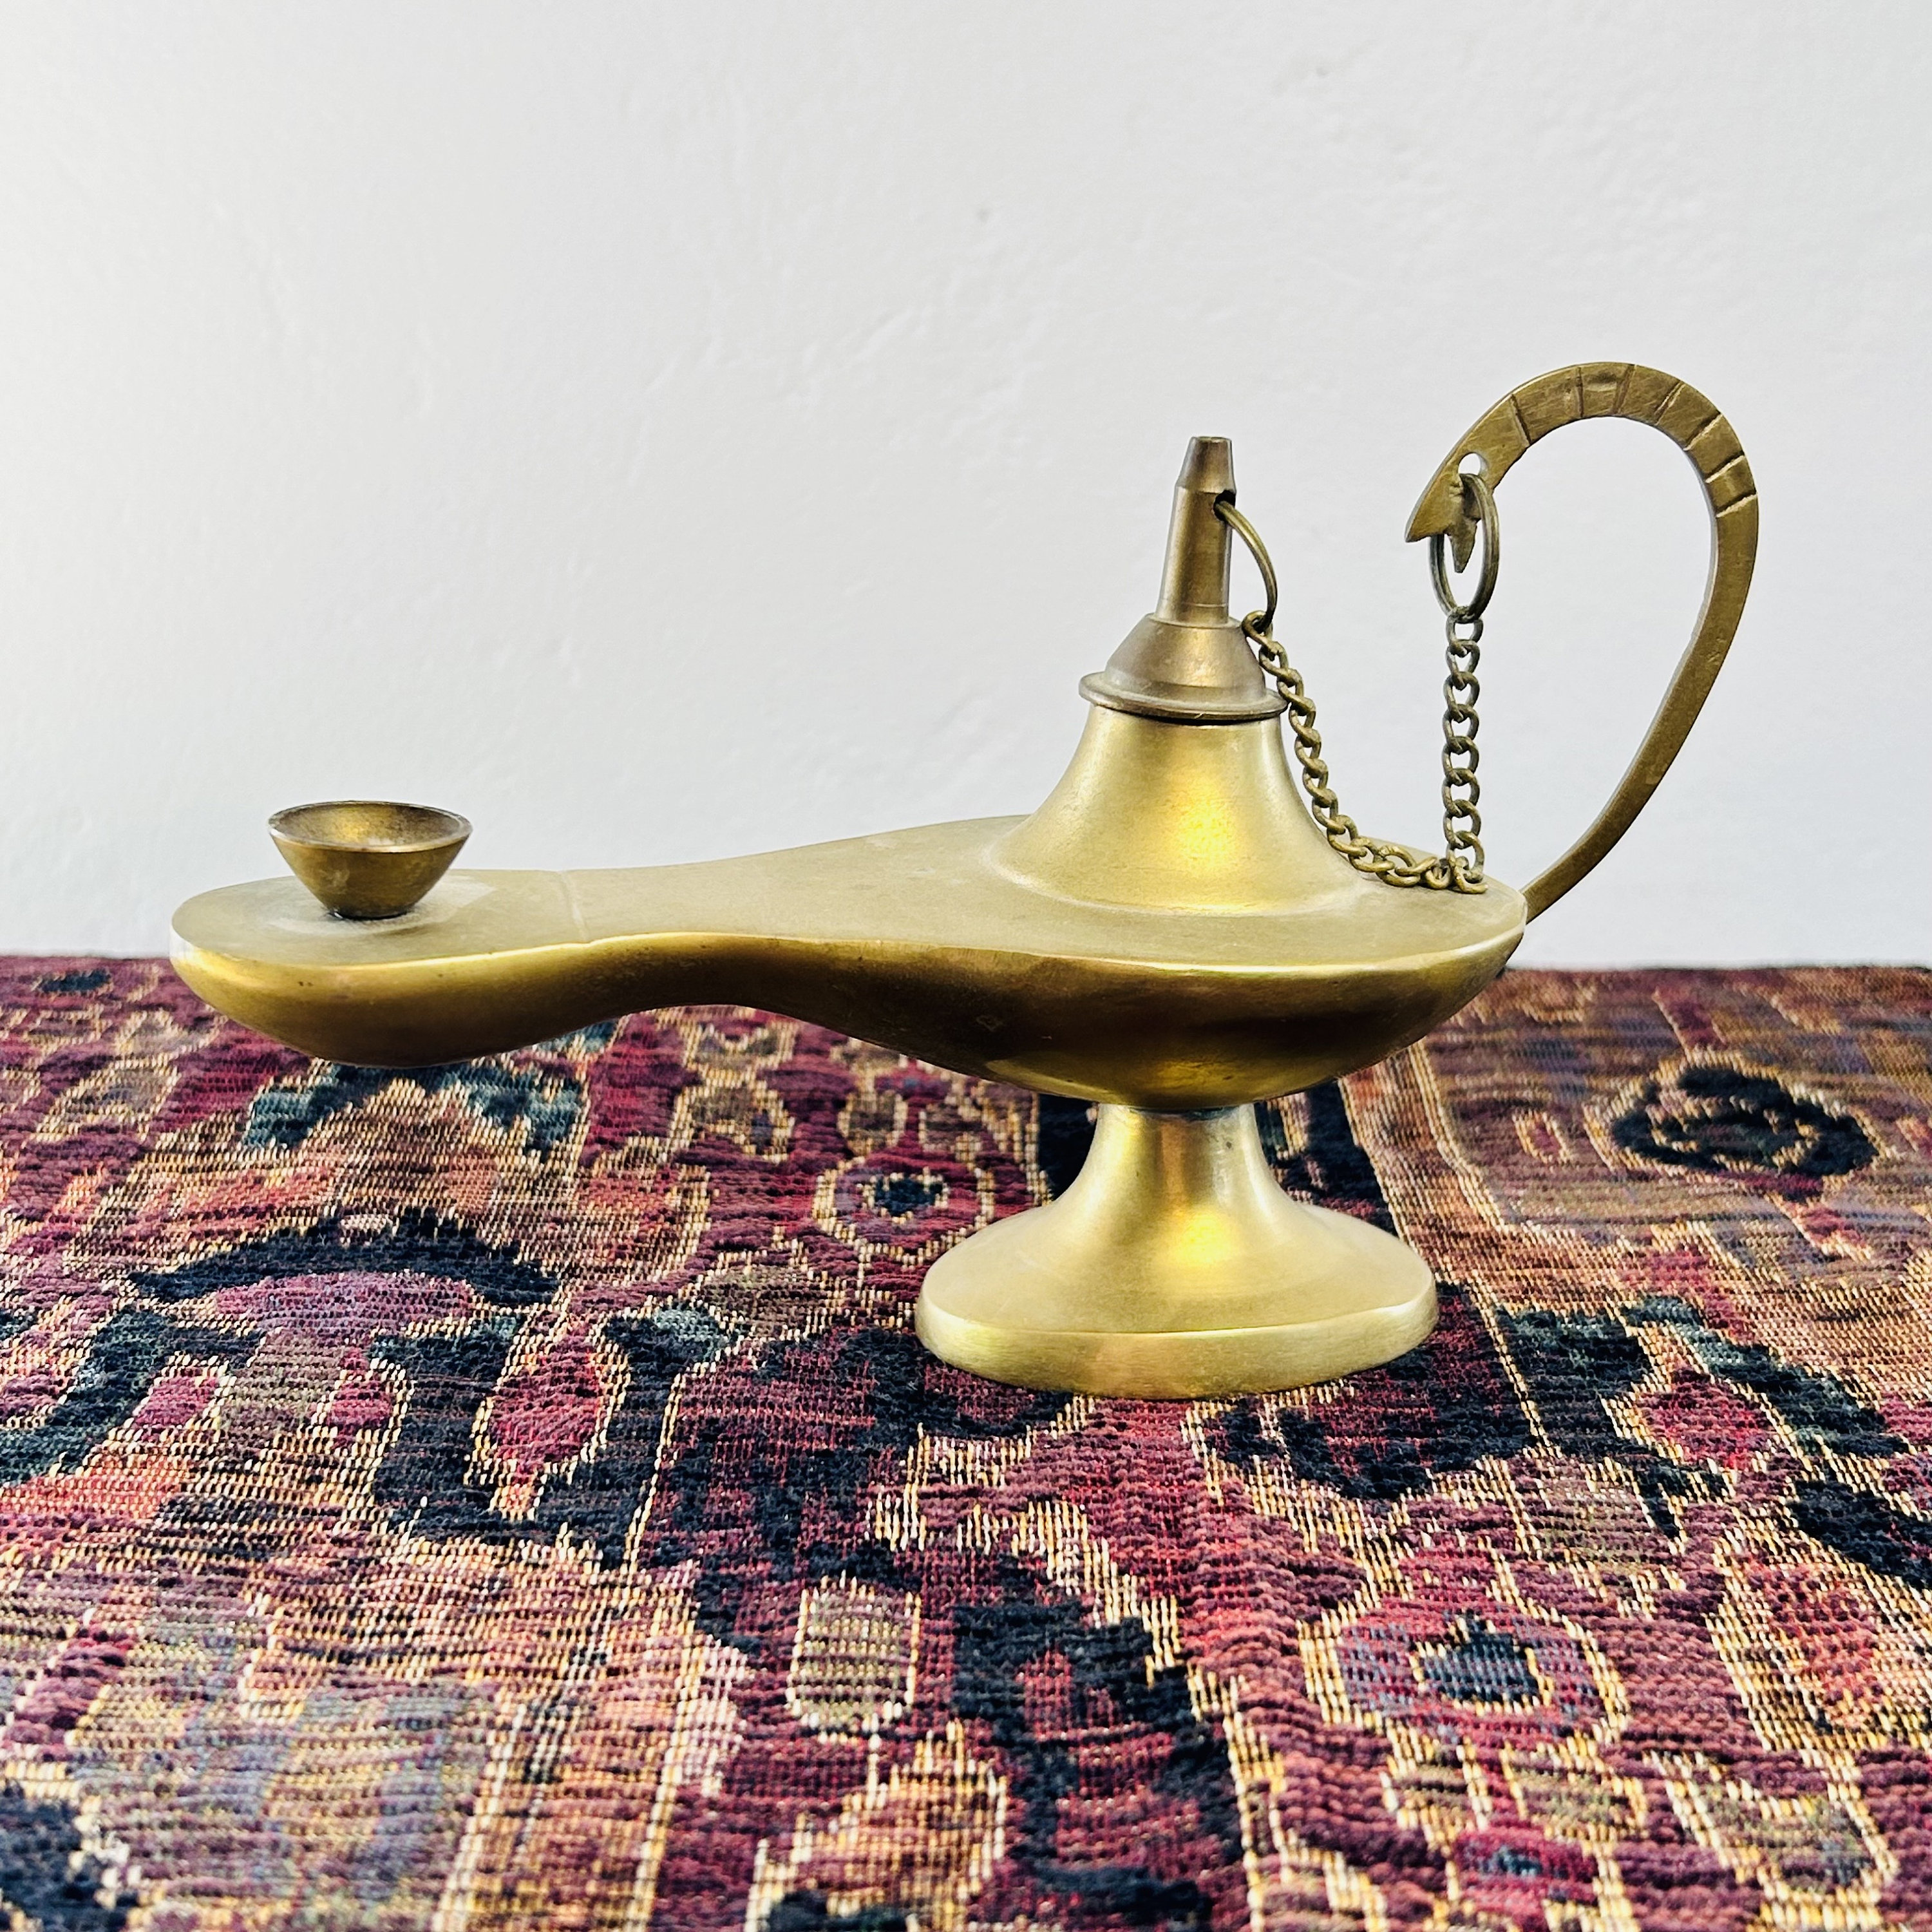 Turkish Vintage Tall Brass Lamp /middle Eastern Ornate Etched Brass Lamp /  Antique Circa 1930s Brass Lamp / 26 Tall Painted Brass Lamp -  Canada